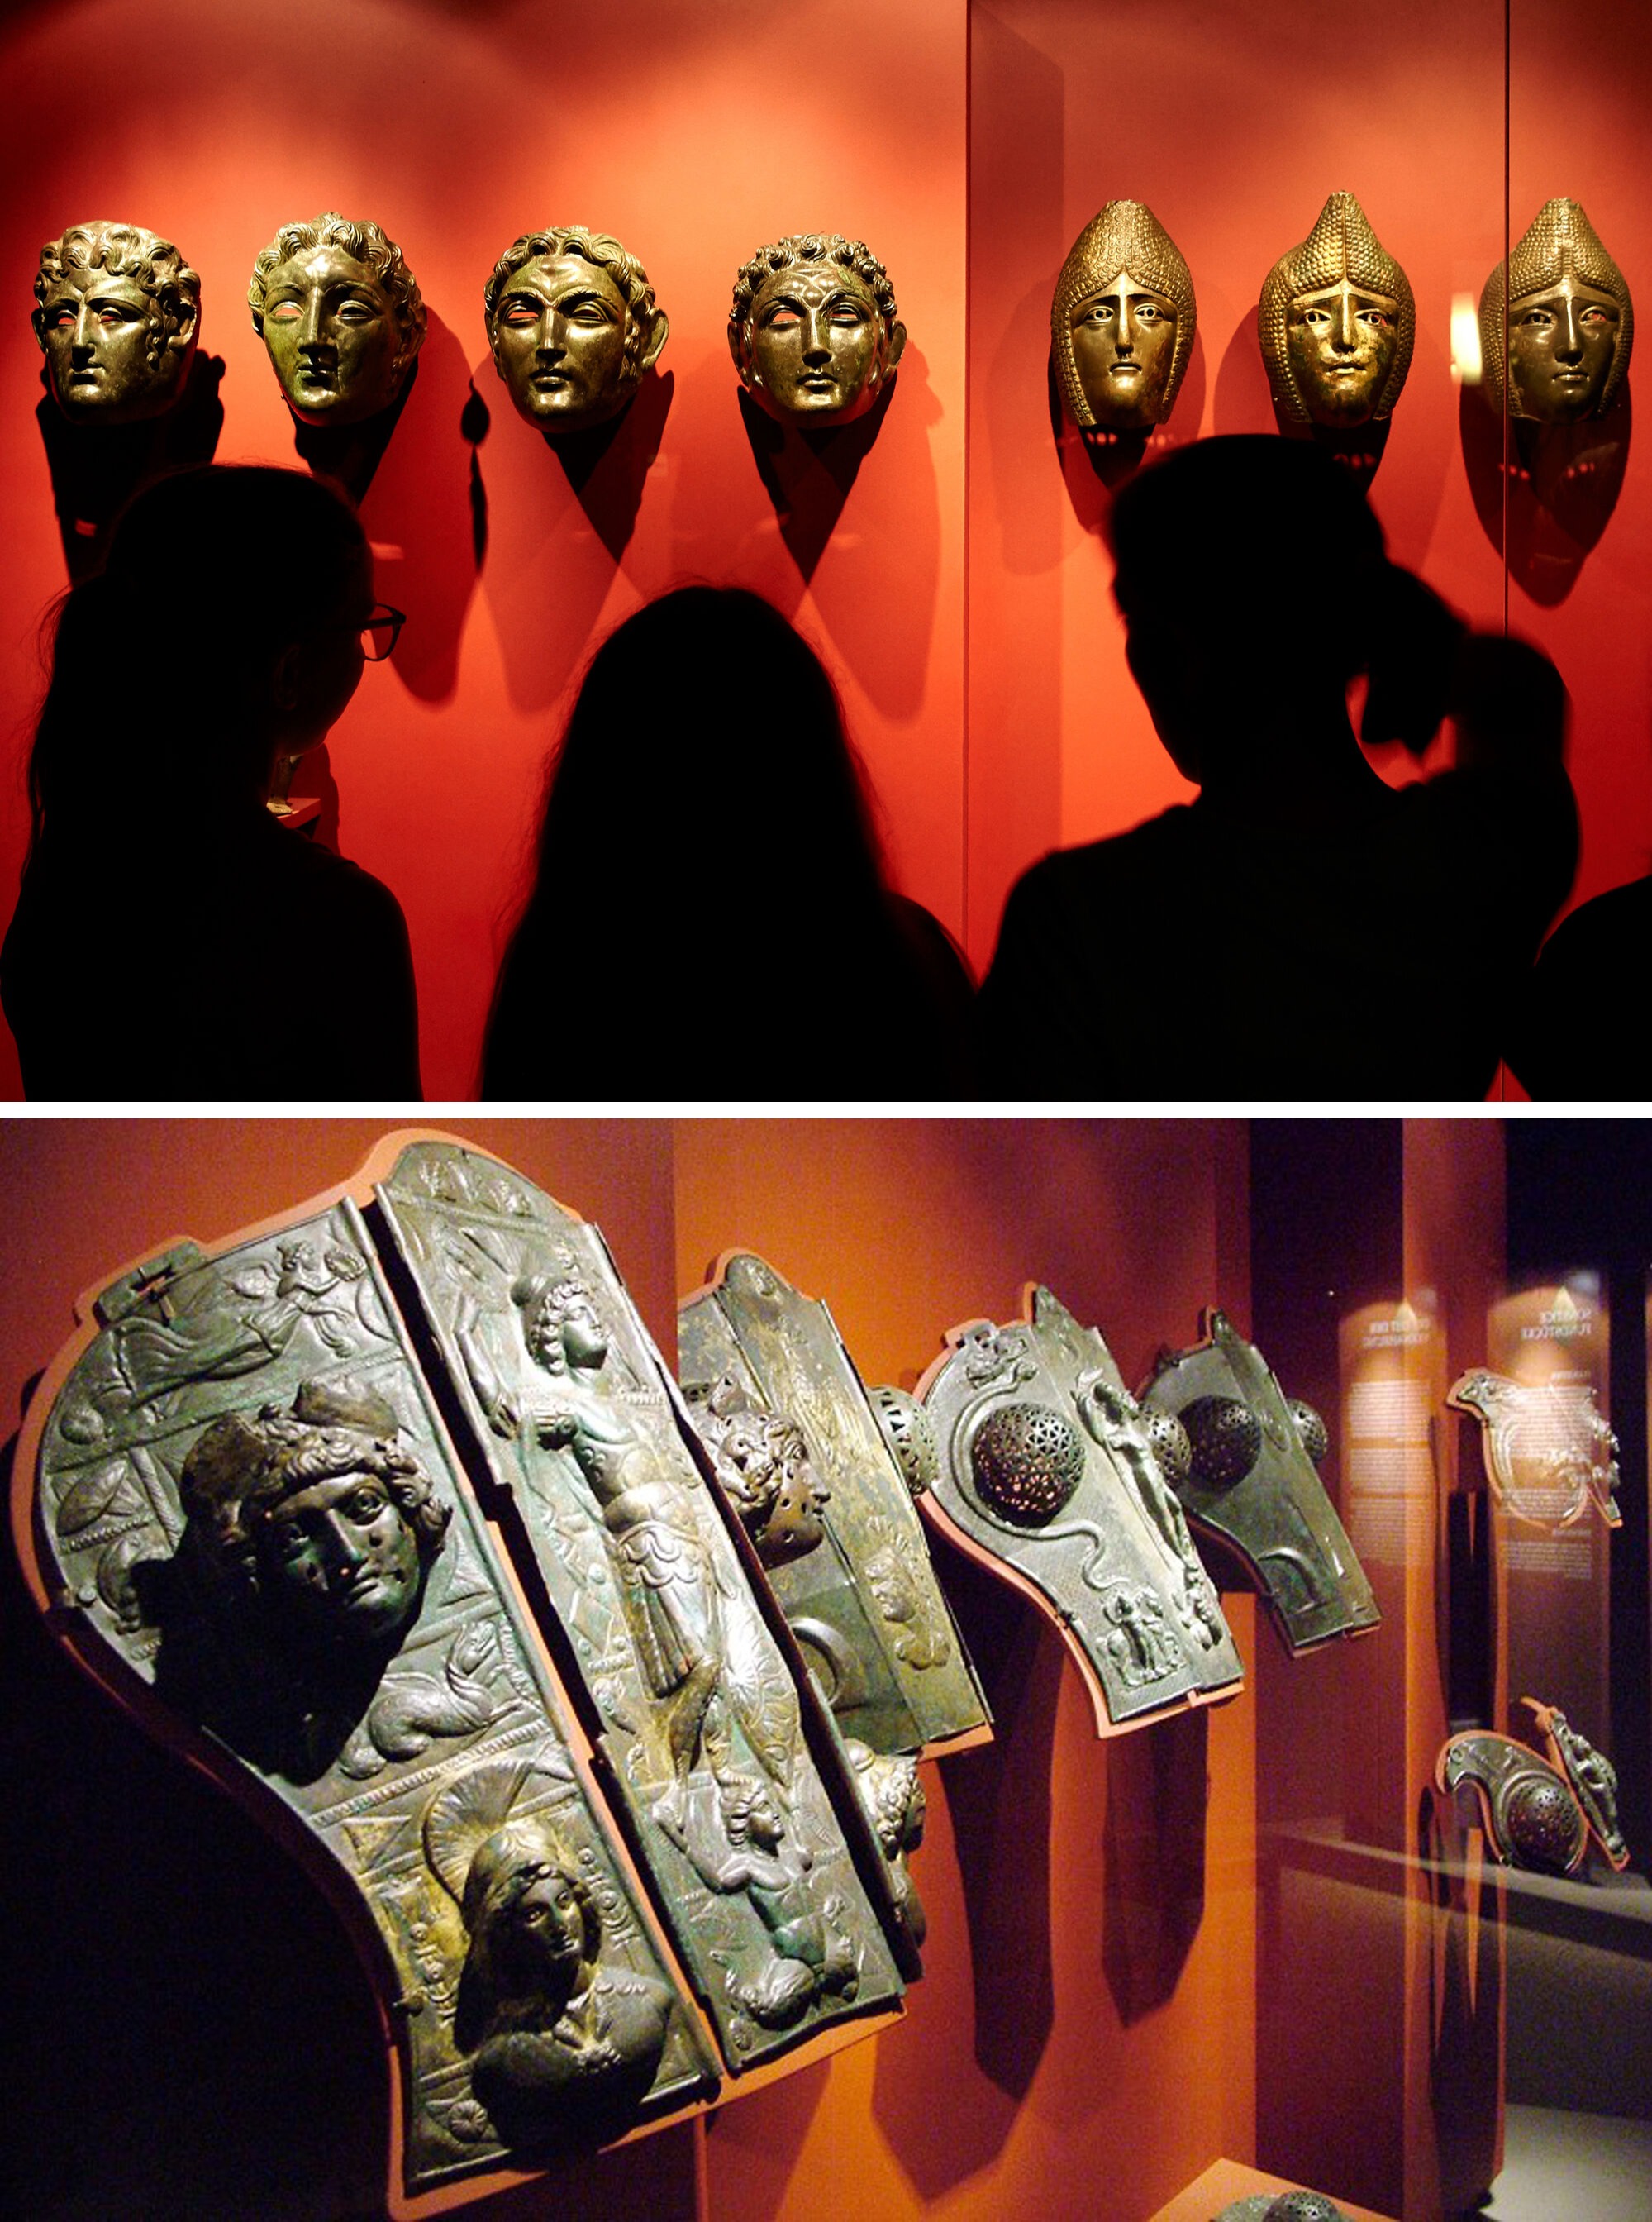 Seven Roman cavalry face masks and shaffrons (Horse's Head Defense) found in Straubing, Germany. 3rd century CE, now housed at Gäubodenmuseum.jpg